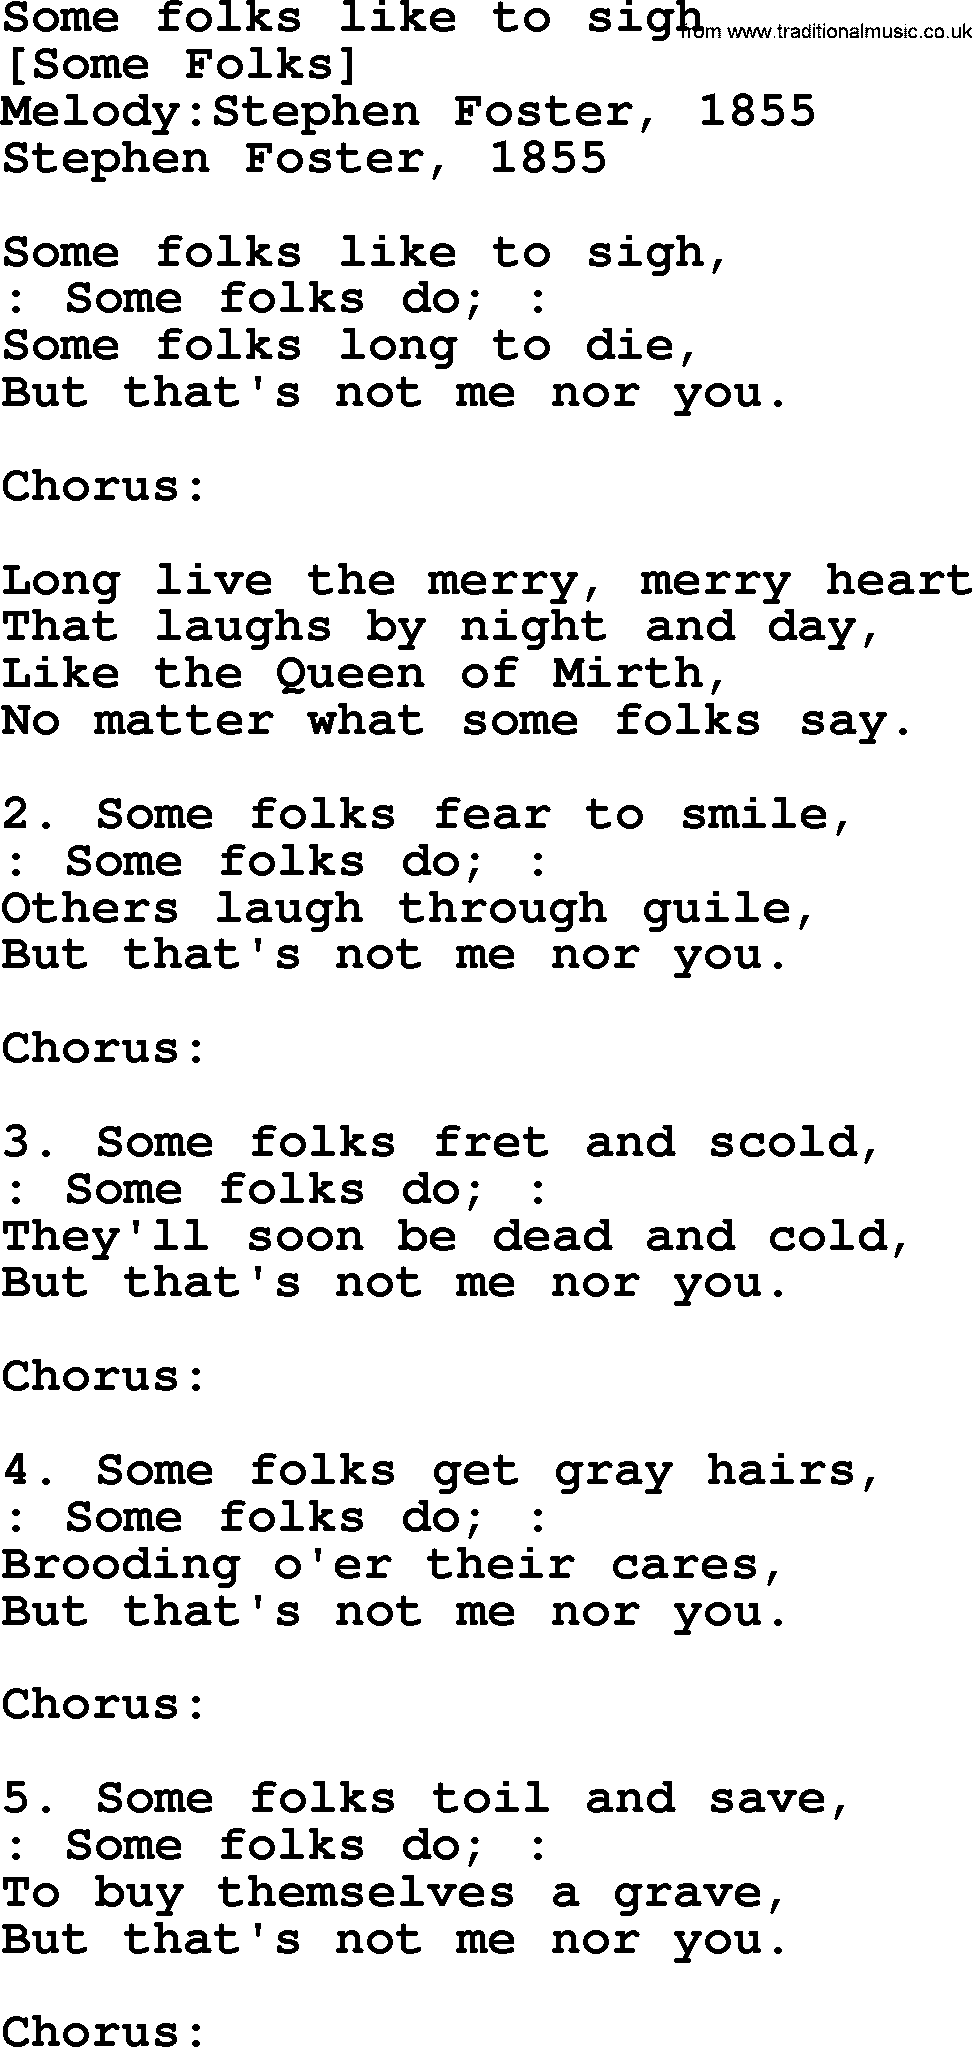 Old American Song: Some Folks Like To Sigh, lyrics